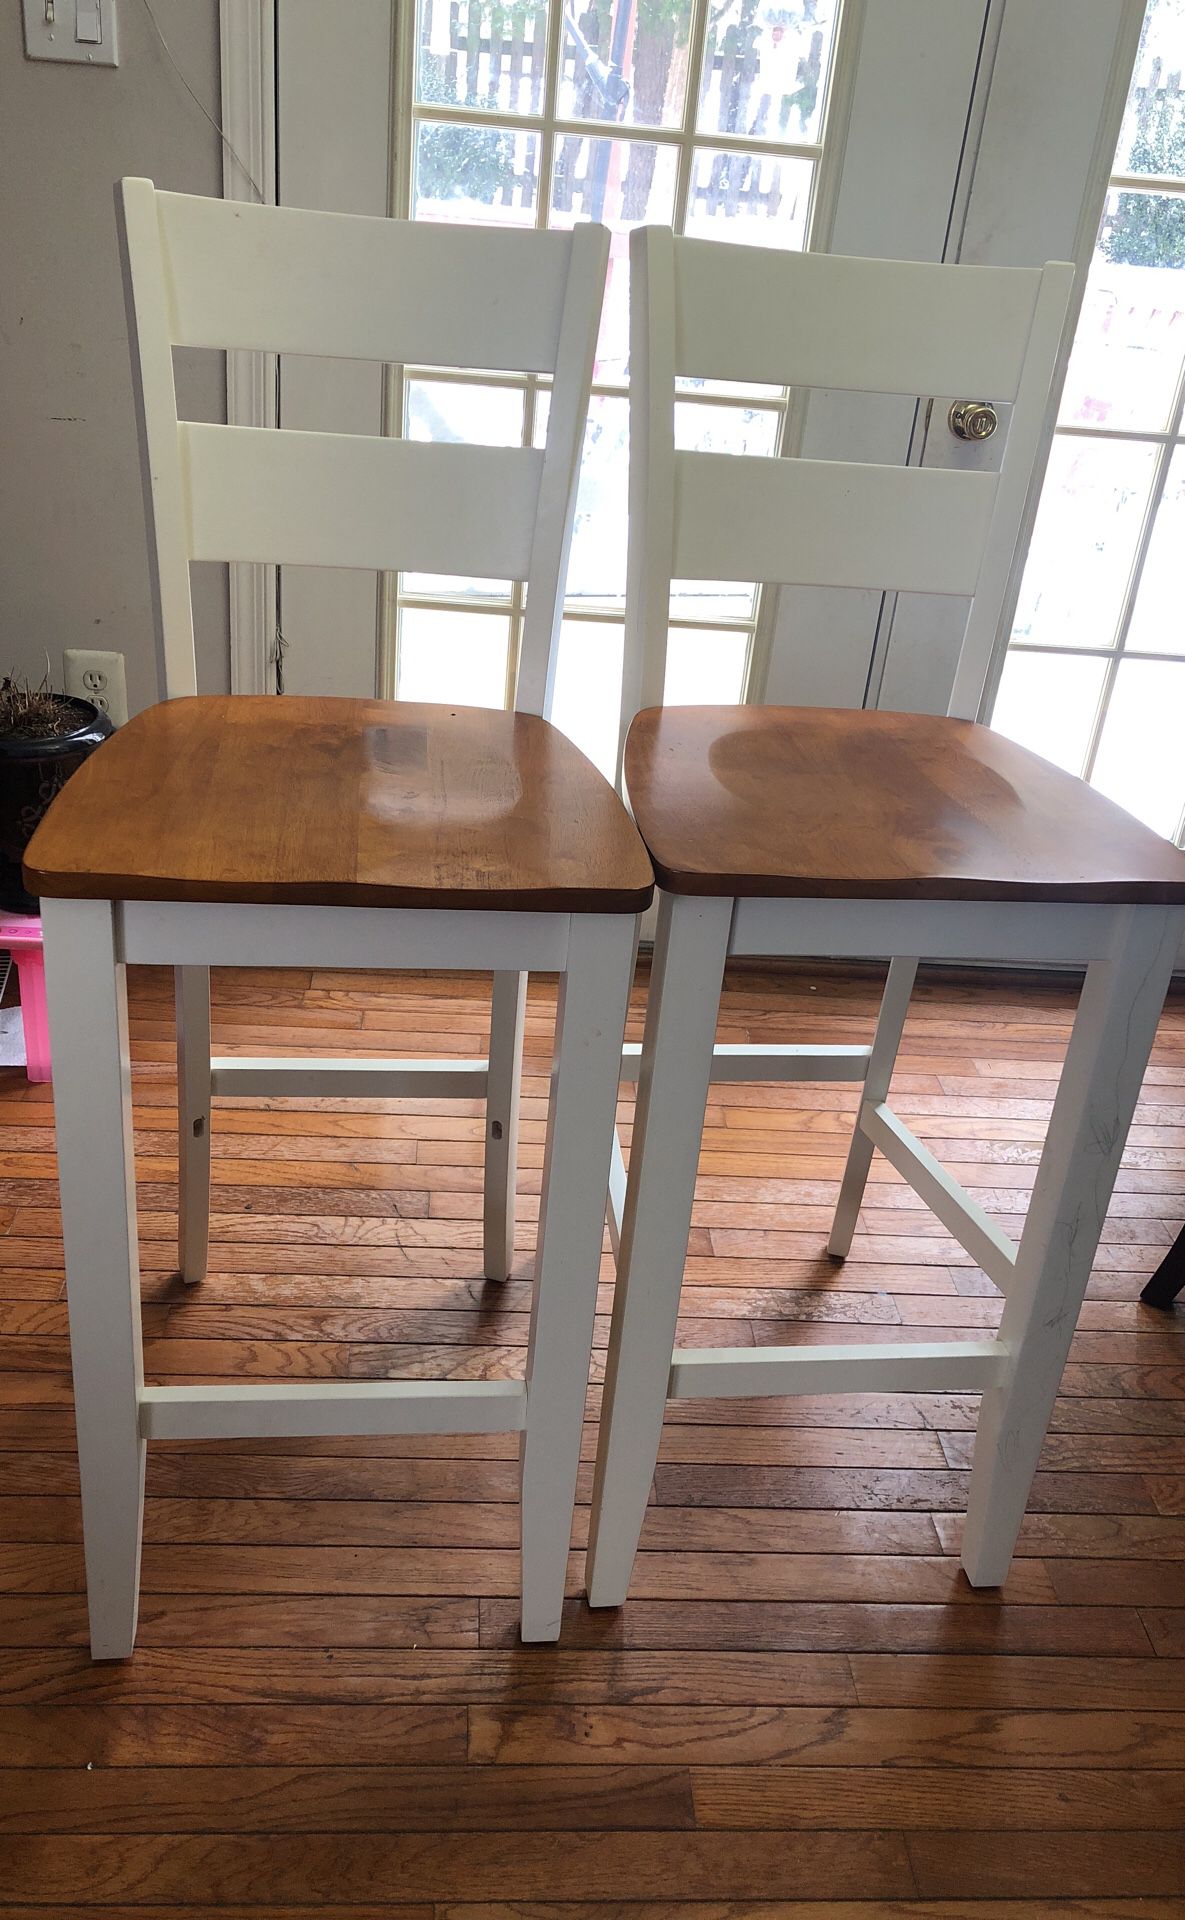 New bar stools for sale $80 for both